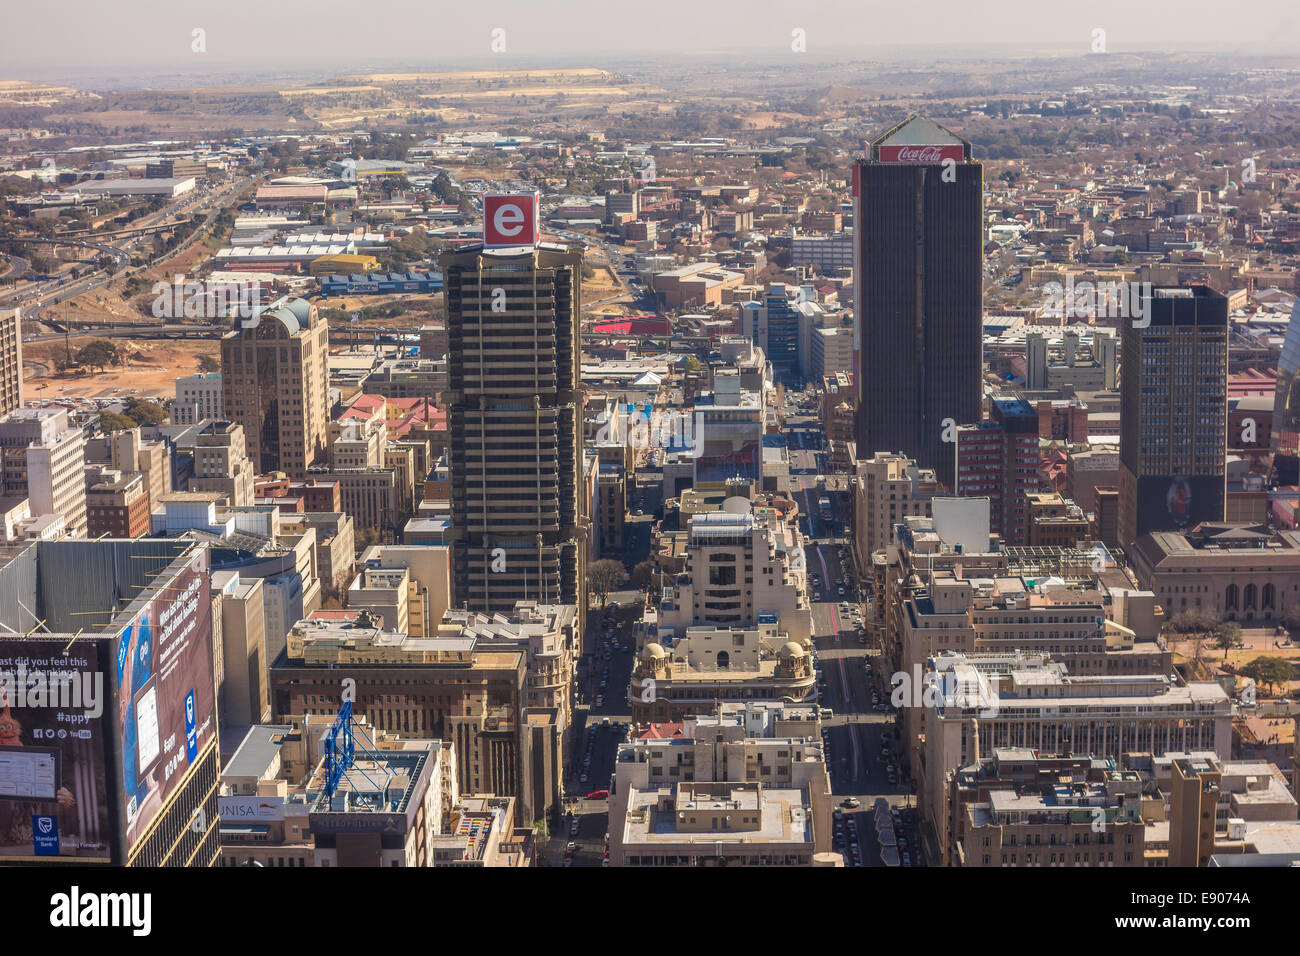 JOHANNESBURG, SOUTH AFRICA - Skyscrapers, buildings in central business district. Aerial view to west from top Carlton Centre. Stock Photo